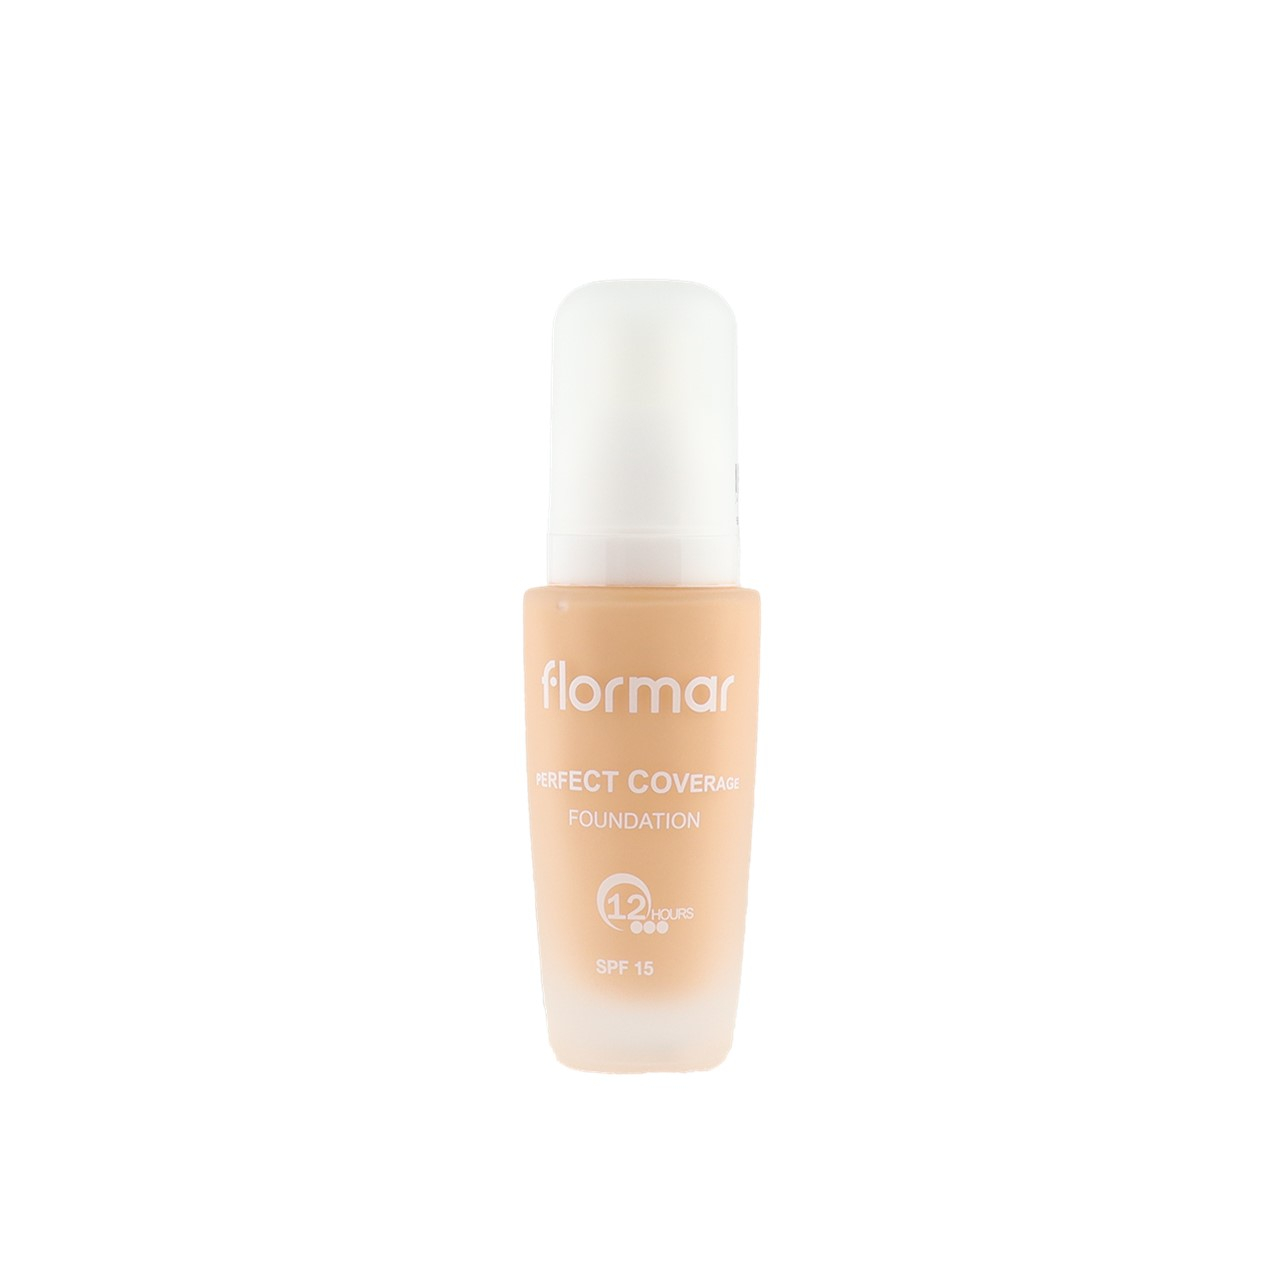 https://static.beautytocare.com/media/catalog/product/f/l/flormar-perfect-coverage-foundation-spf15-103-creamy-beige-30ml.jpg